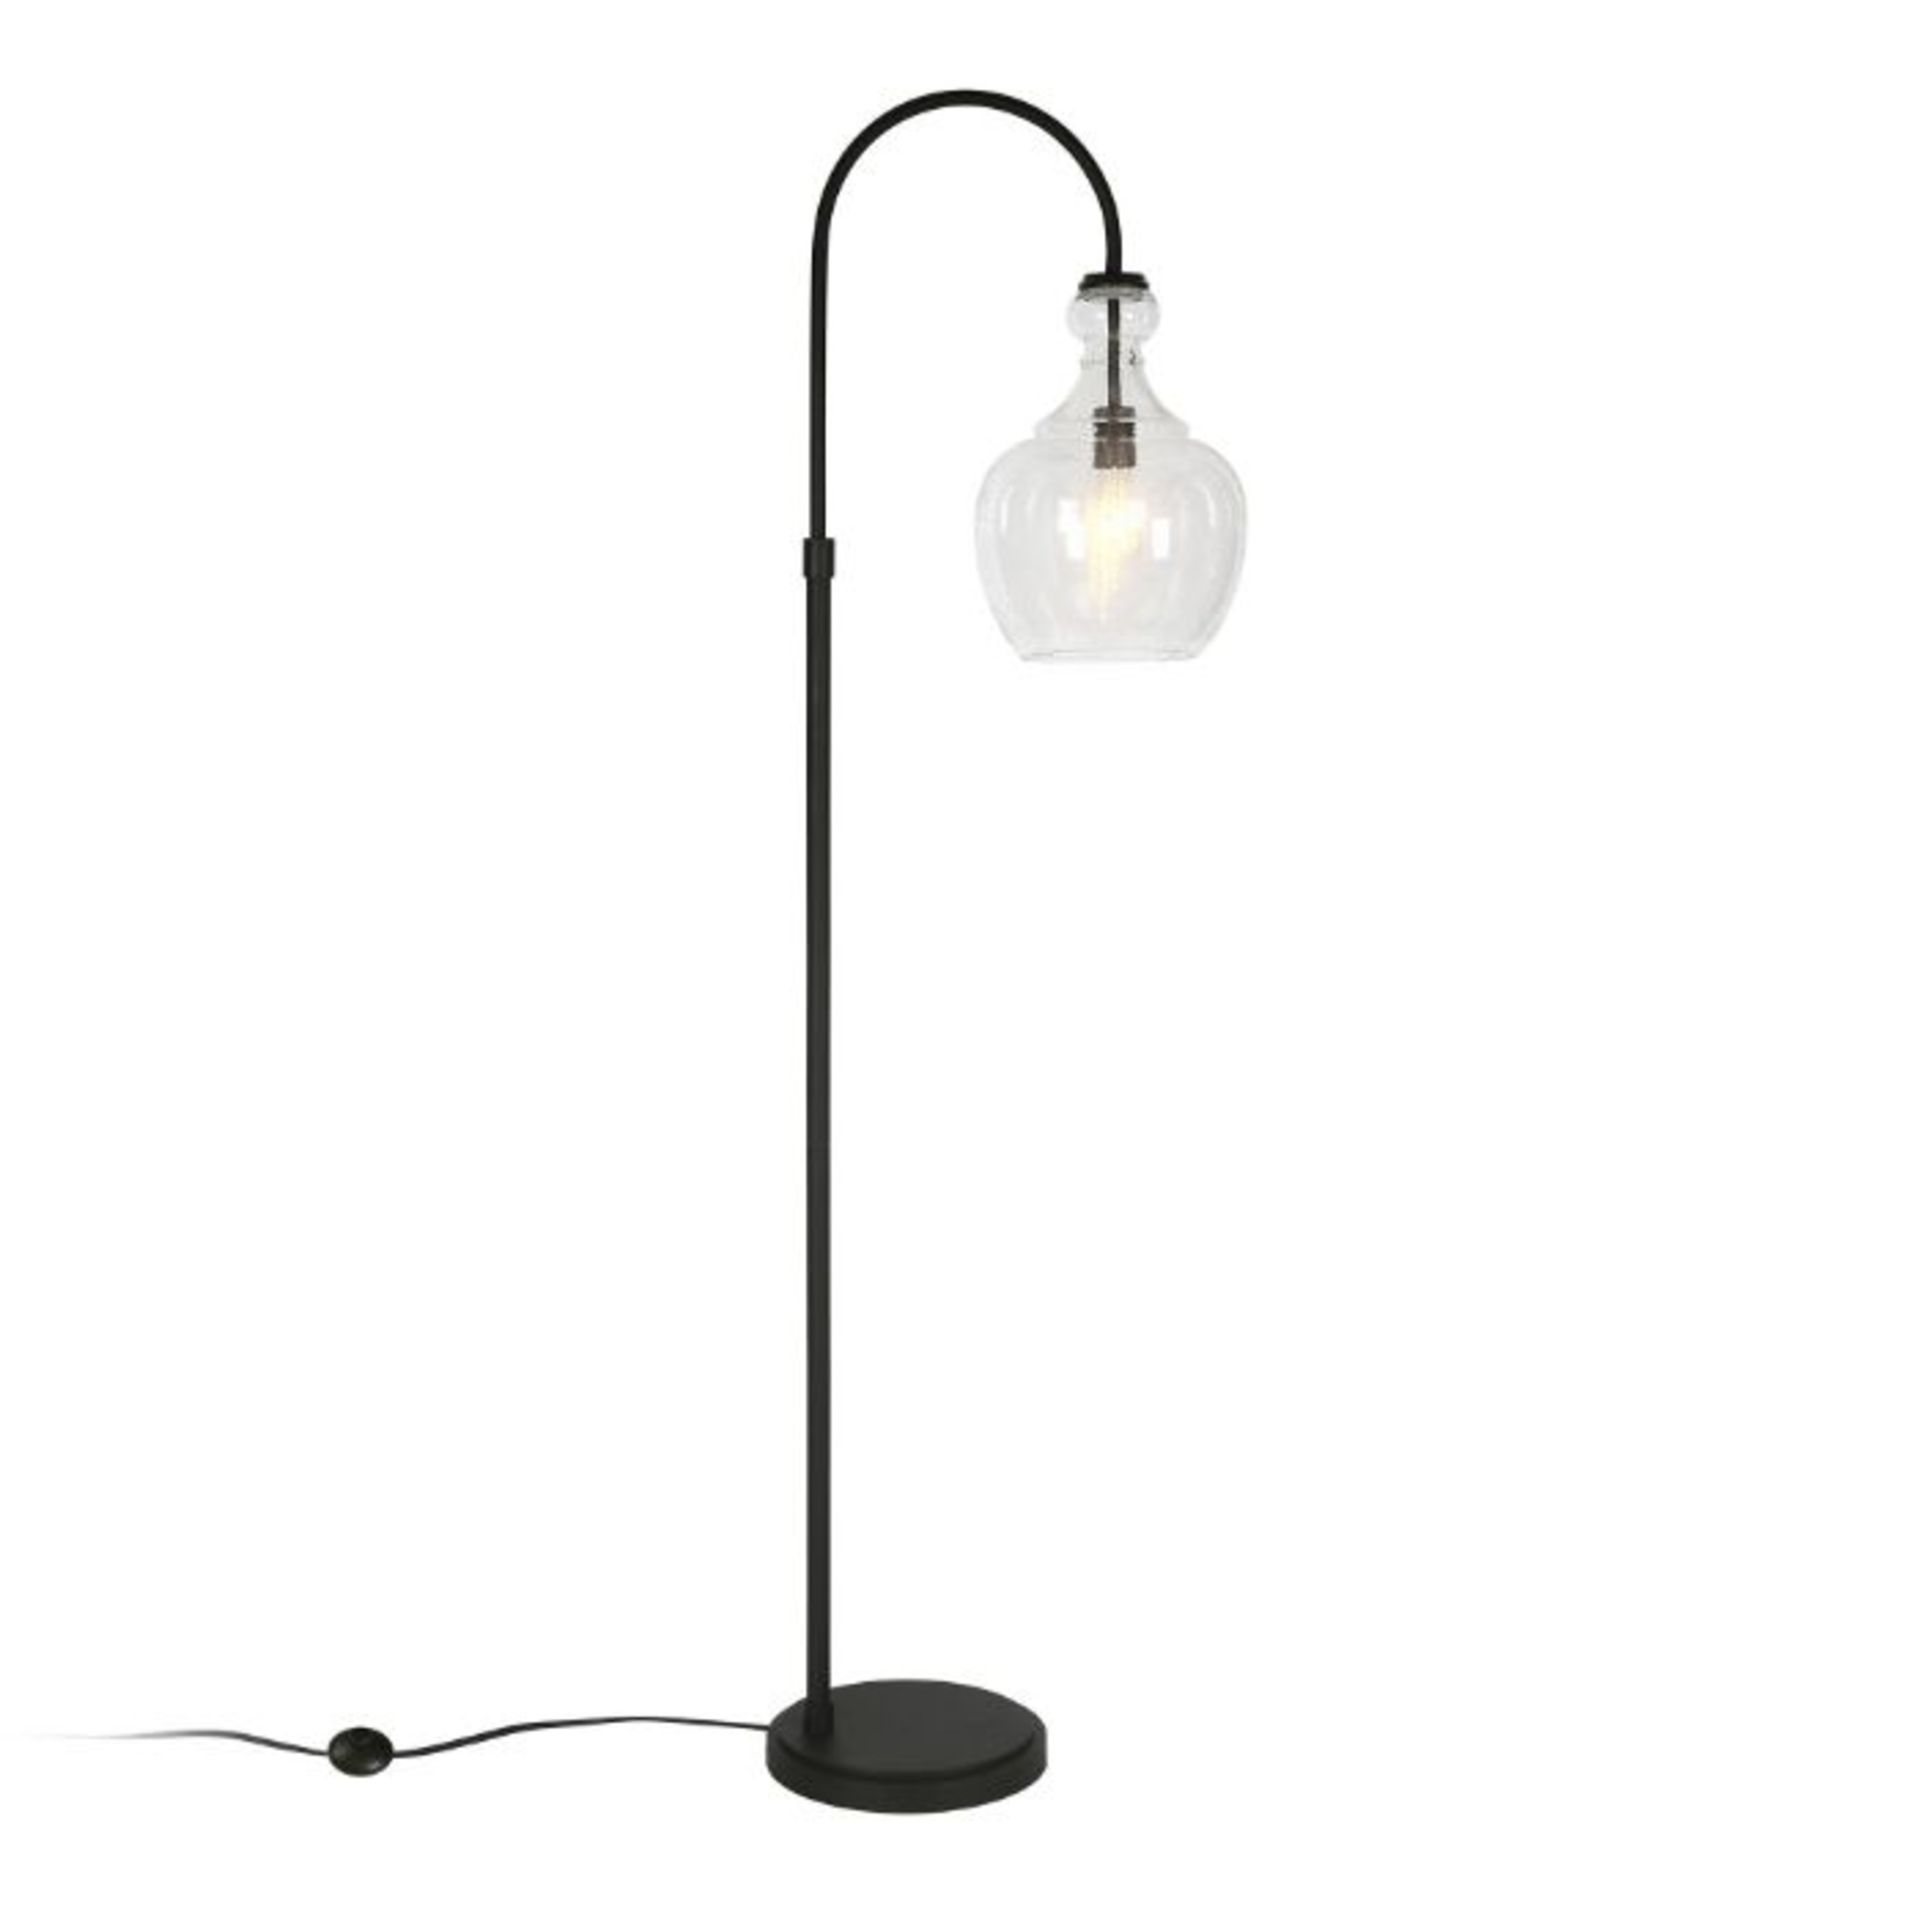 Blue Elephant, Dayna 177.8cm Arched Floor Lamp (BLACKENED BRONZE/GLASS FINISHED) - RRP £176.99 (N/